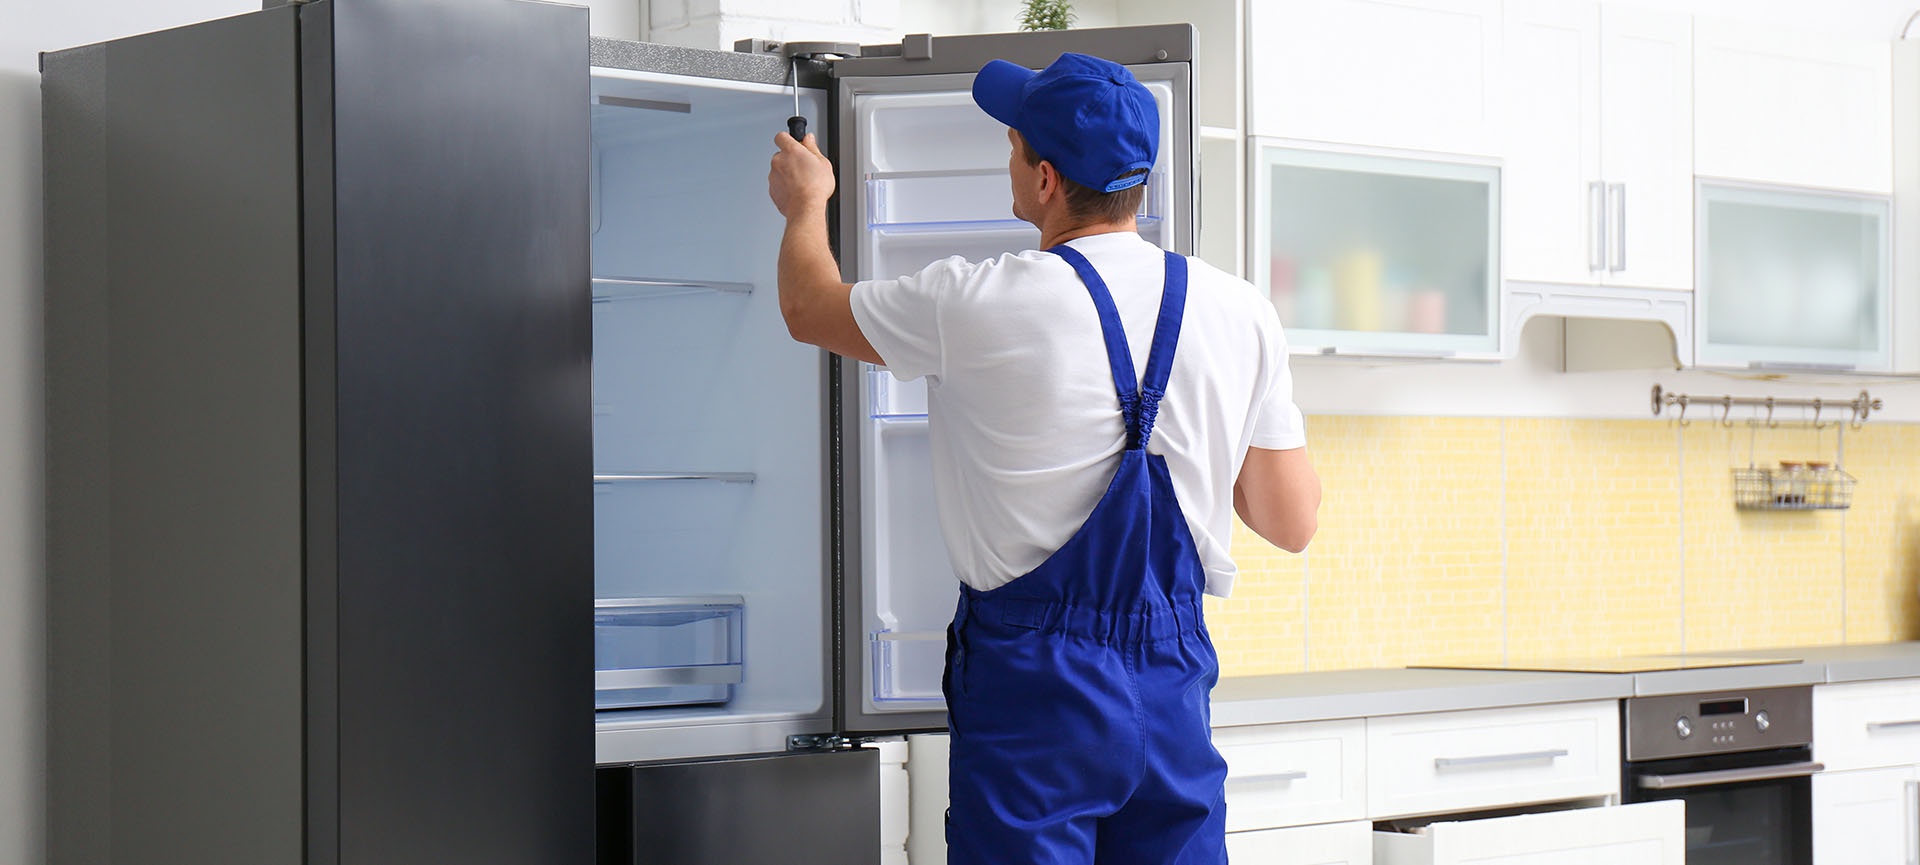 How to properly maintain your refrigerator to last longer?